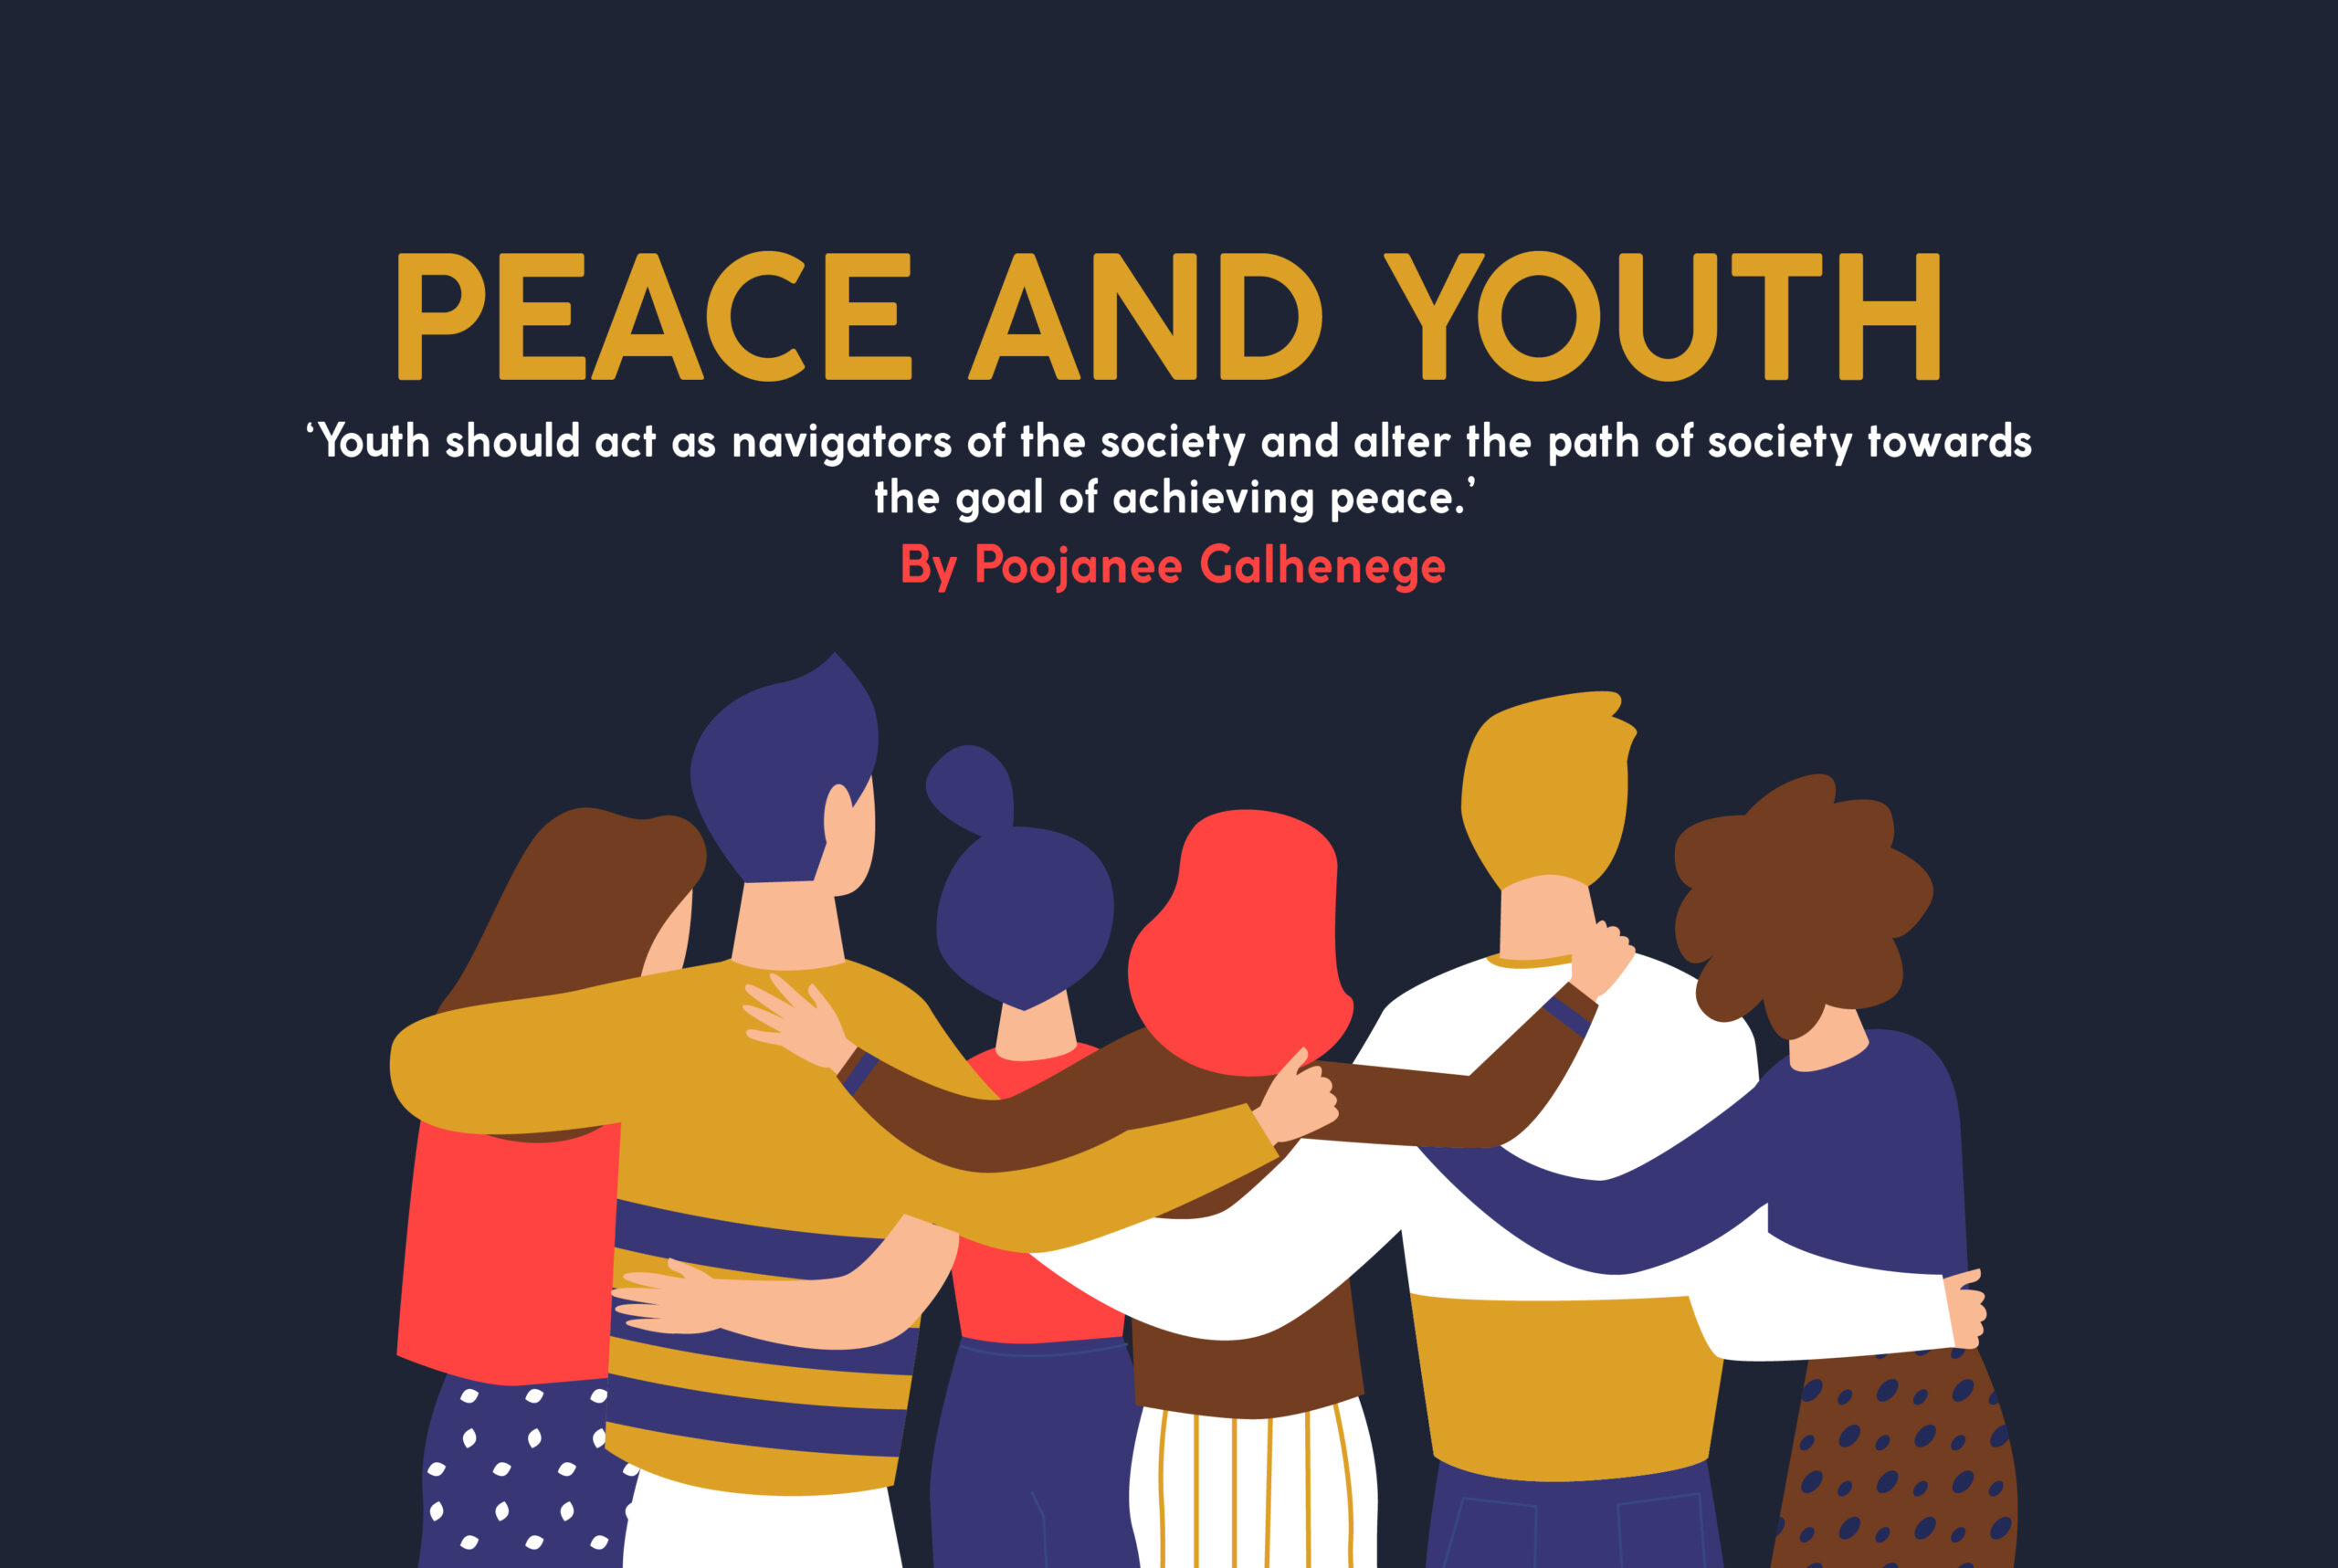 global youth and peace education movement